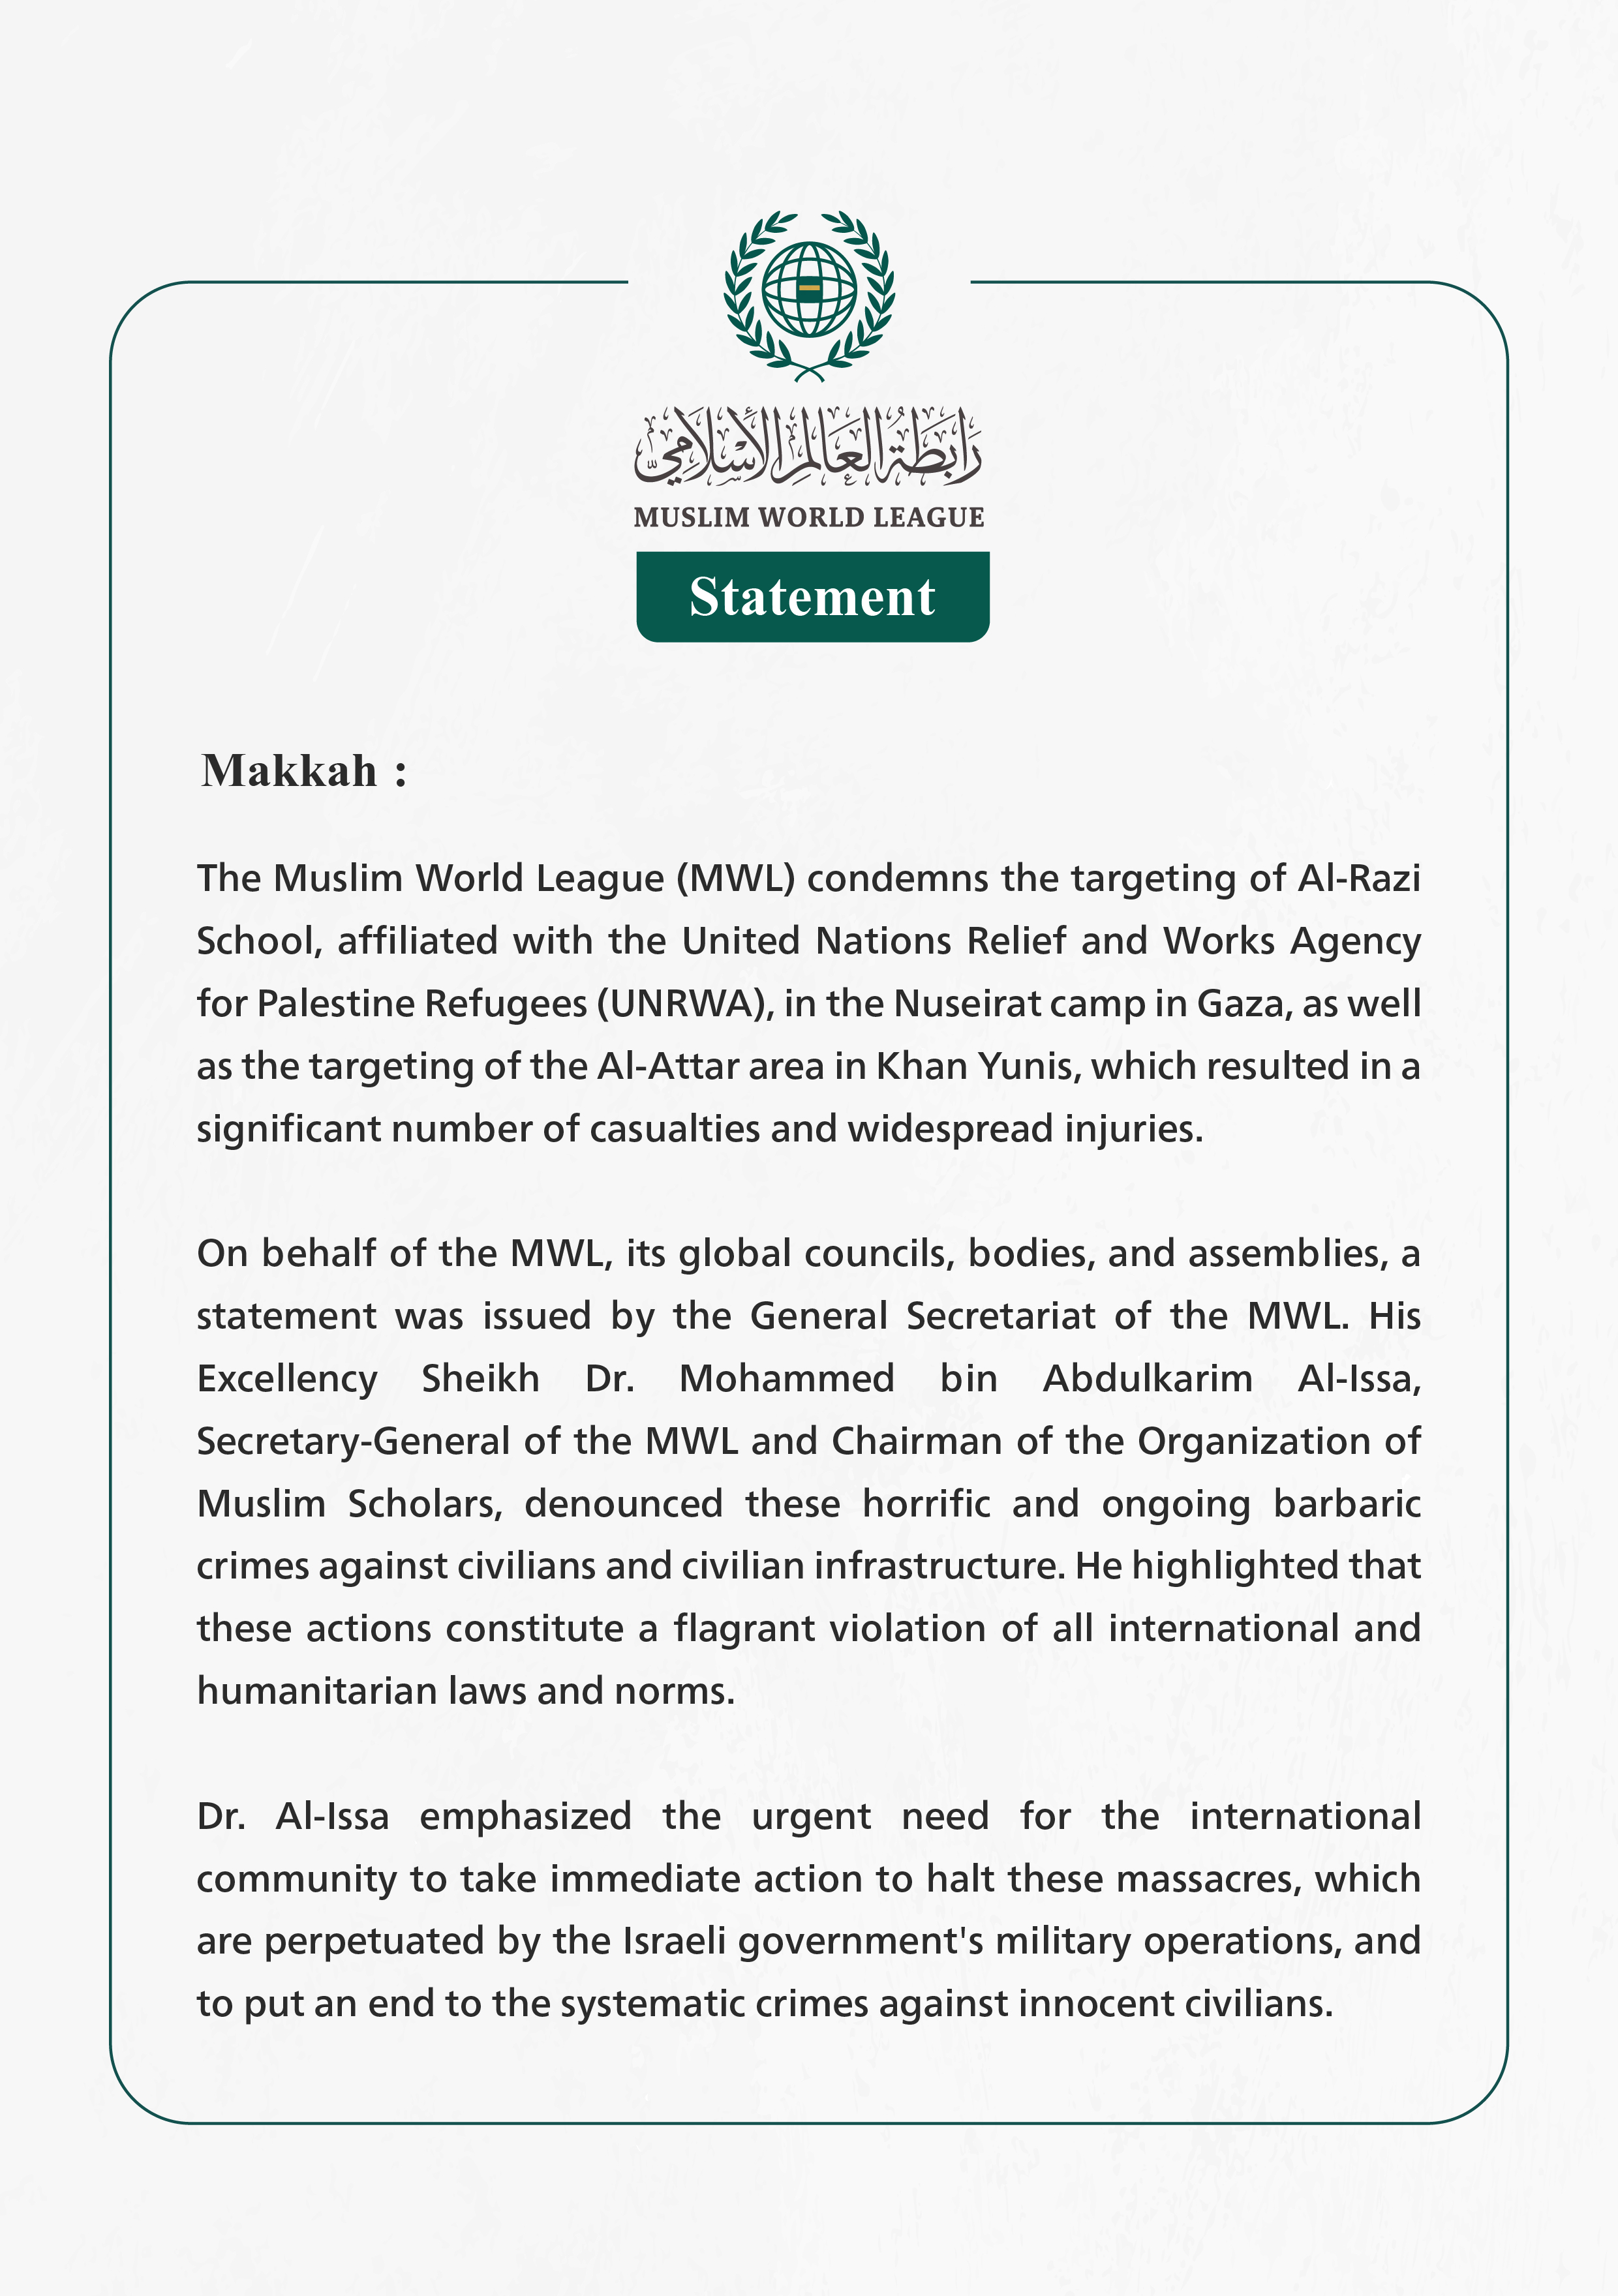 The Muslim World League Condemns the Targeting of Al-Razi School Affiliated with UNRWA in the Nuseirat Camp in Gaza and the Targeting of the Al-Attar Area in Khan Yunis